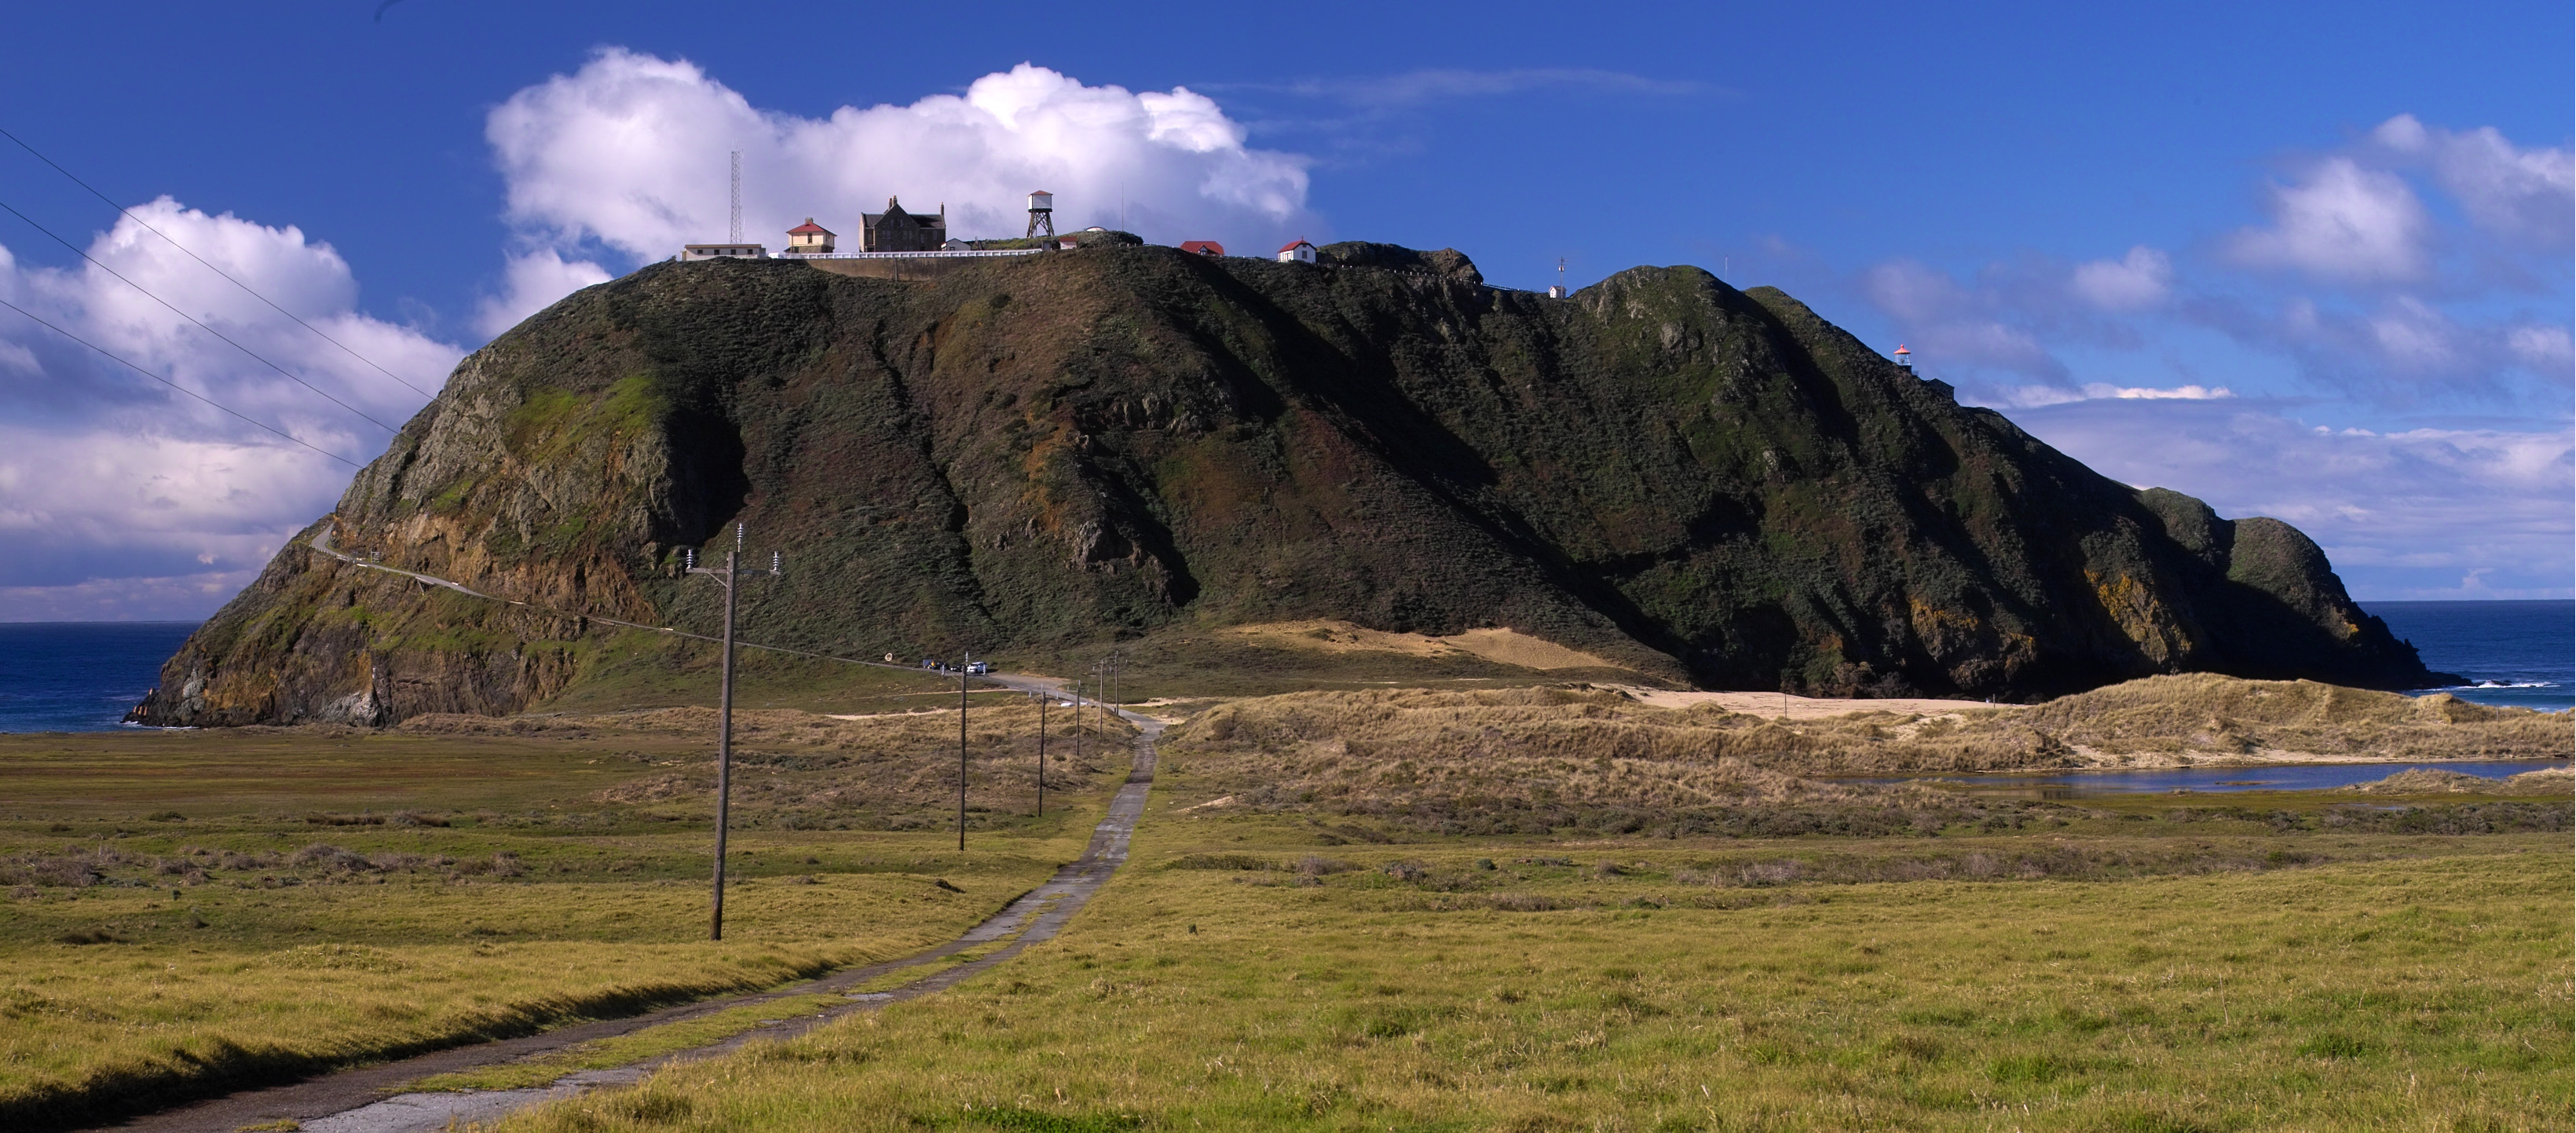 the lighthouse complex at point sur